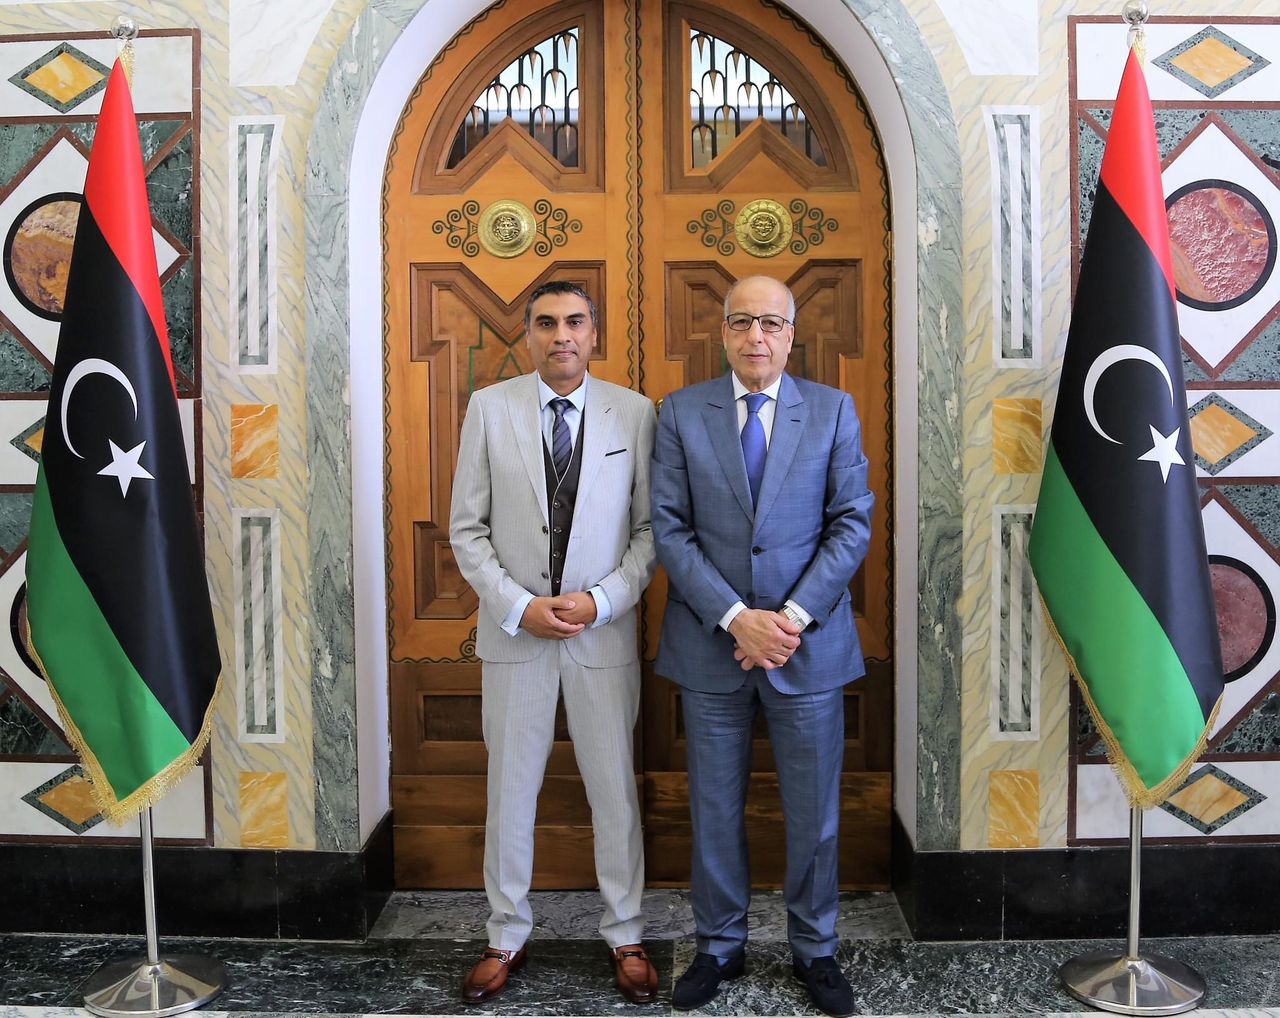 Central Bank of Libya reunified after almost a decade